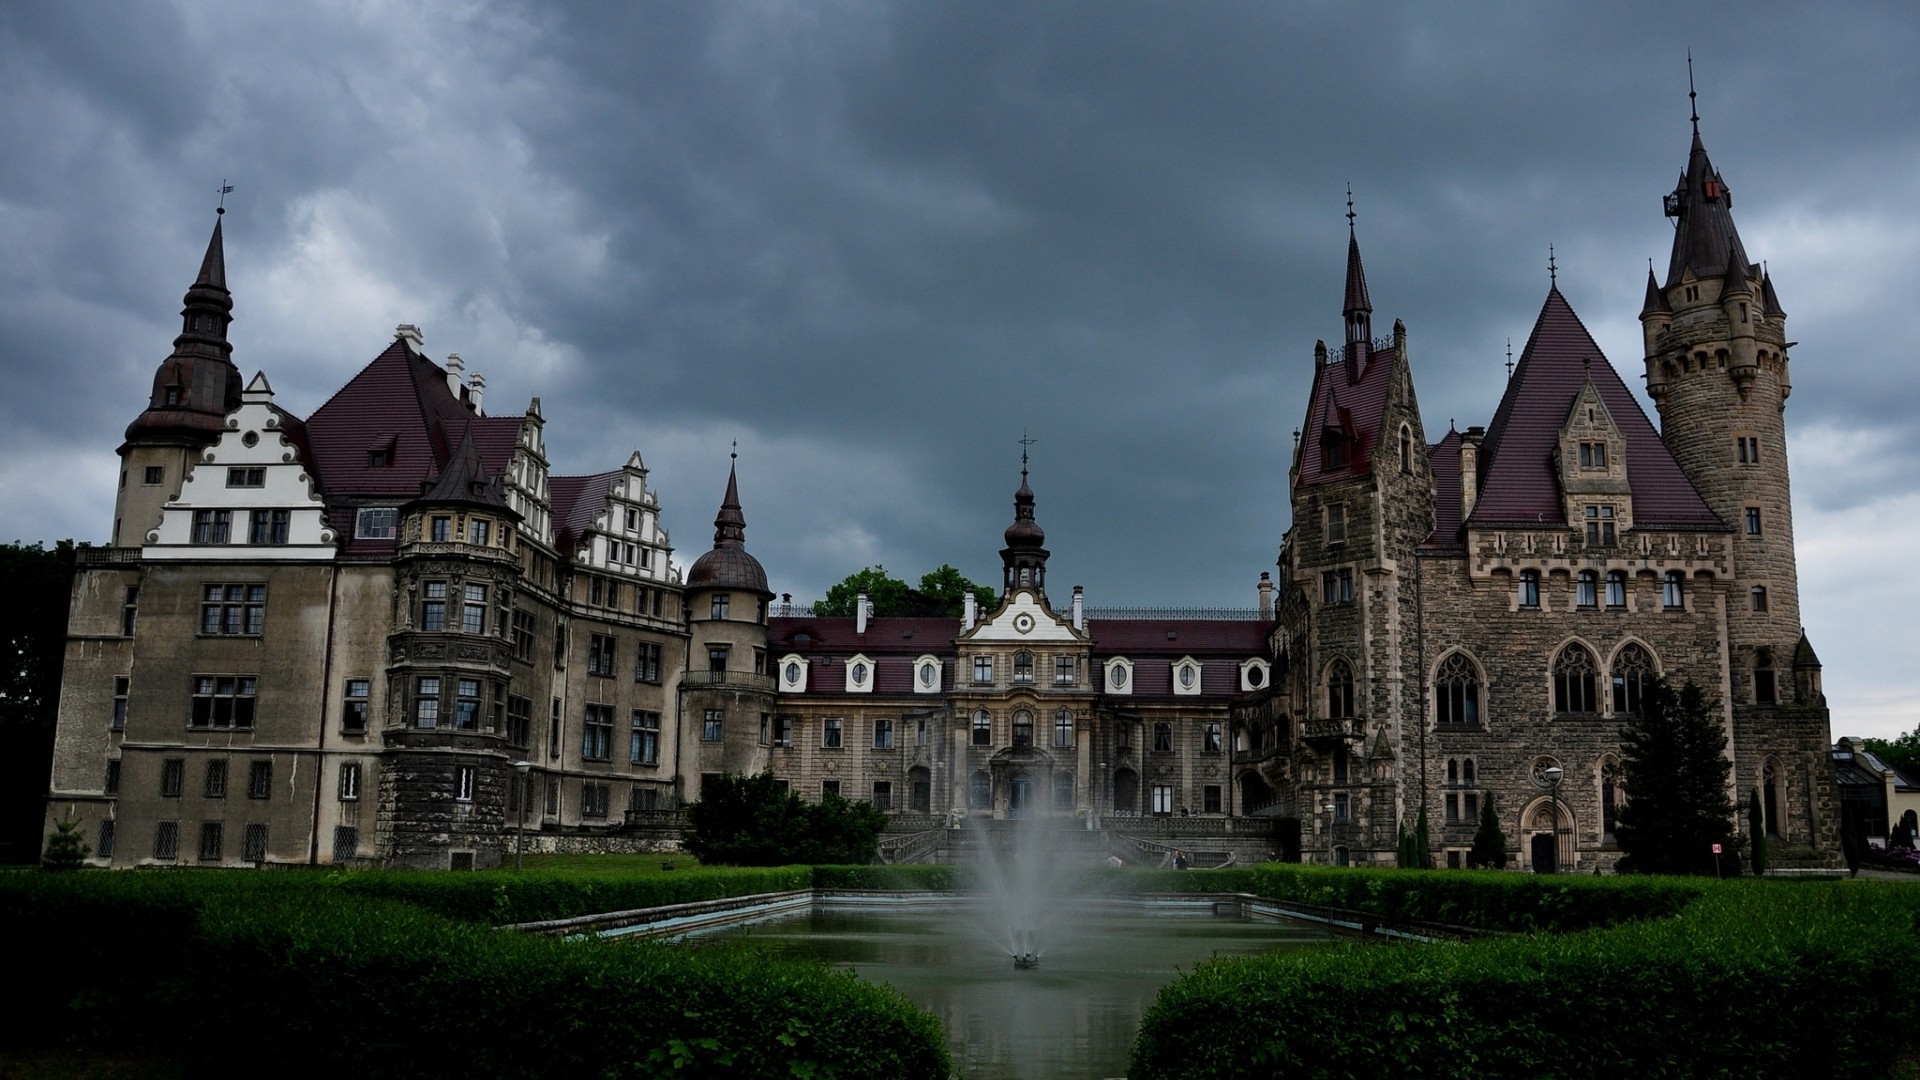 nature, Architecture, Landscape, Castle, Poland, Clouds, Grass, Old Building, Tower, Park, Water, Fountain, Arch, Loneliness Wallpaper